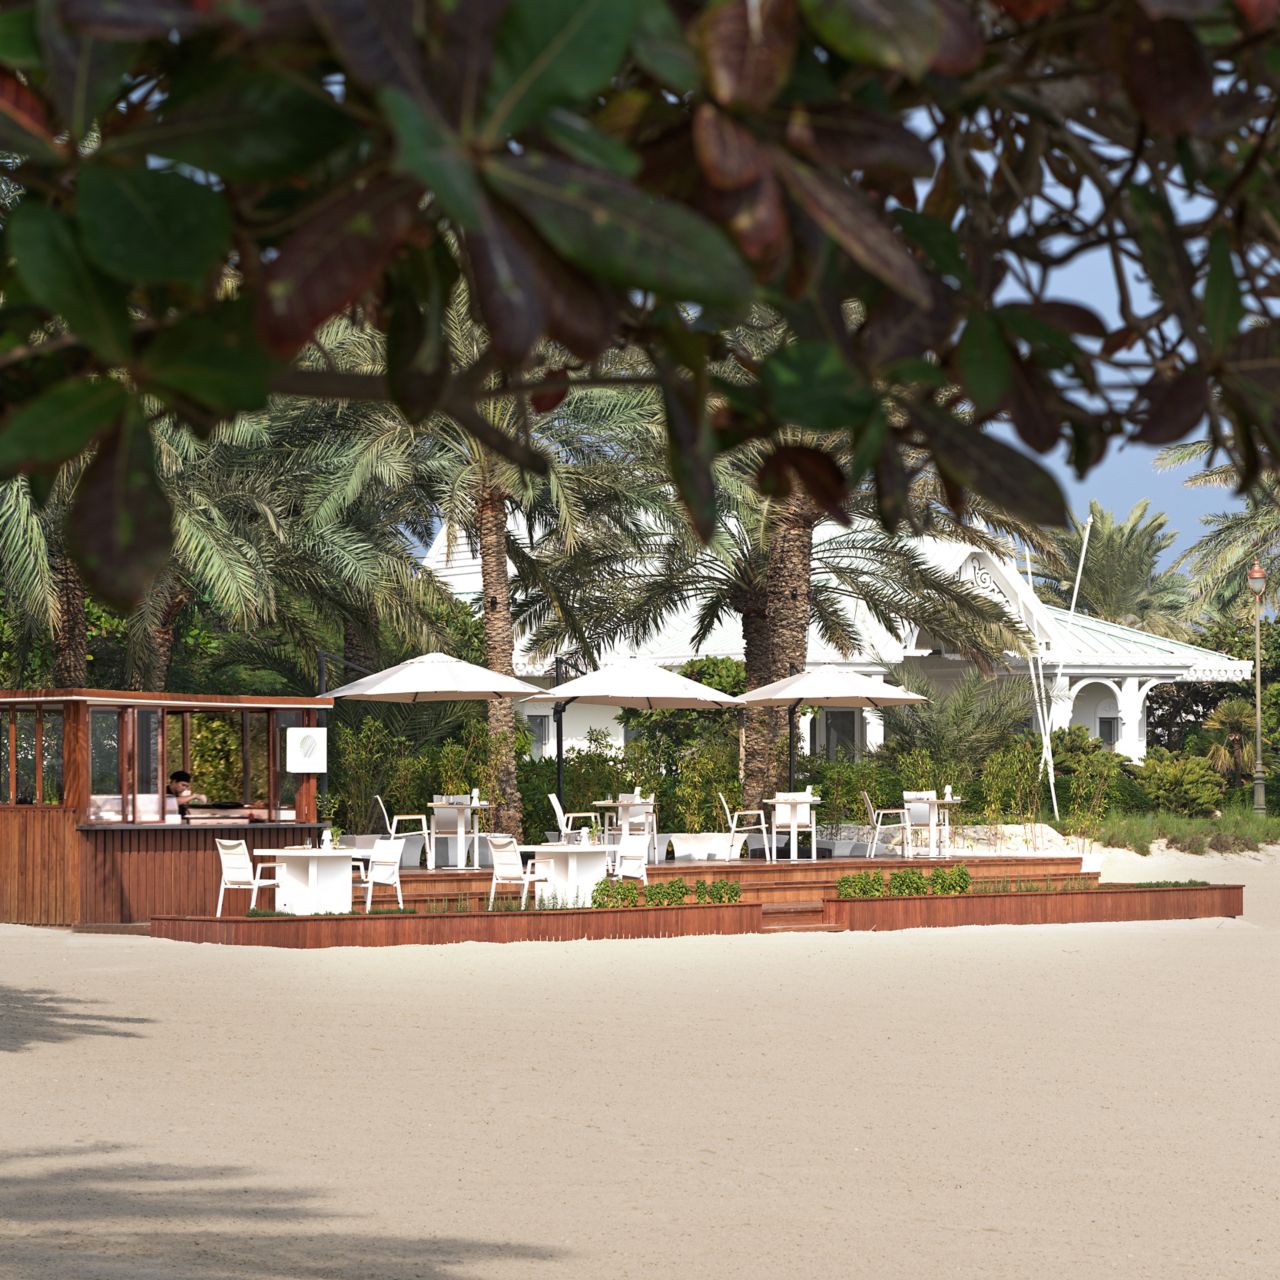 Outdoor dining setup on the beach